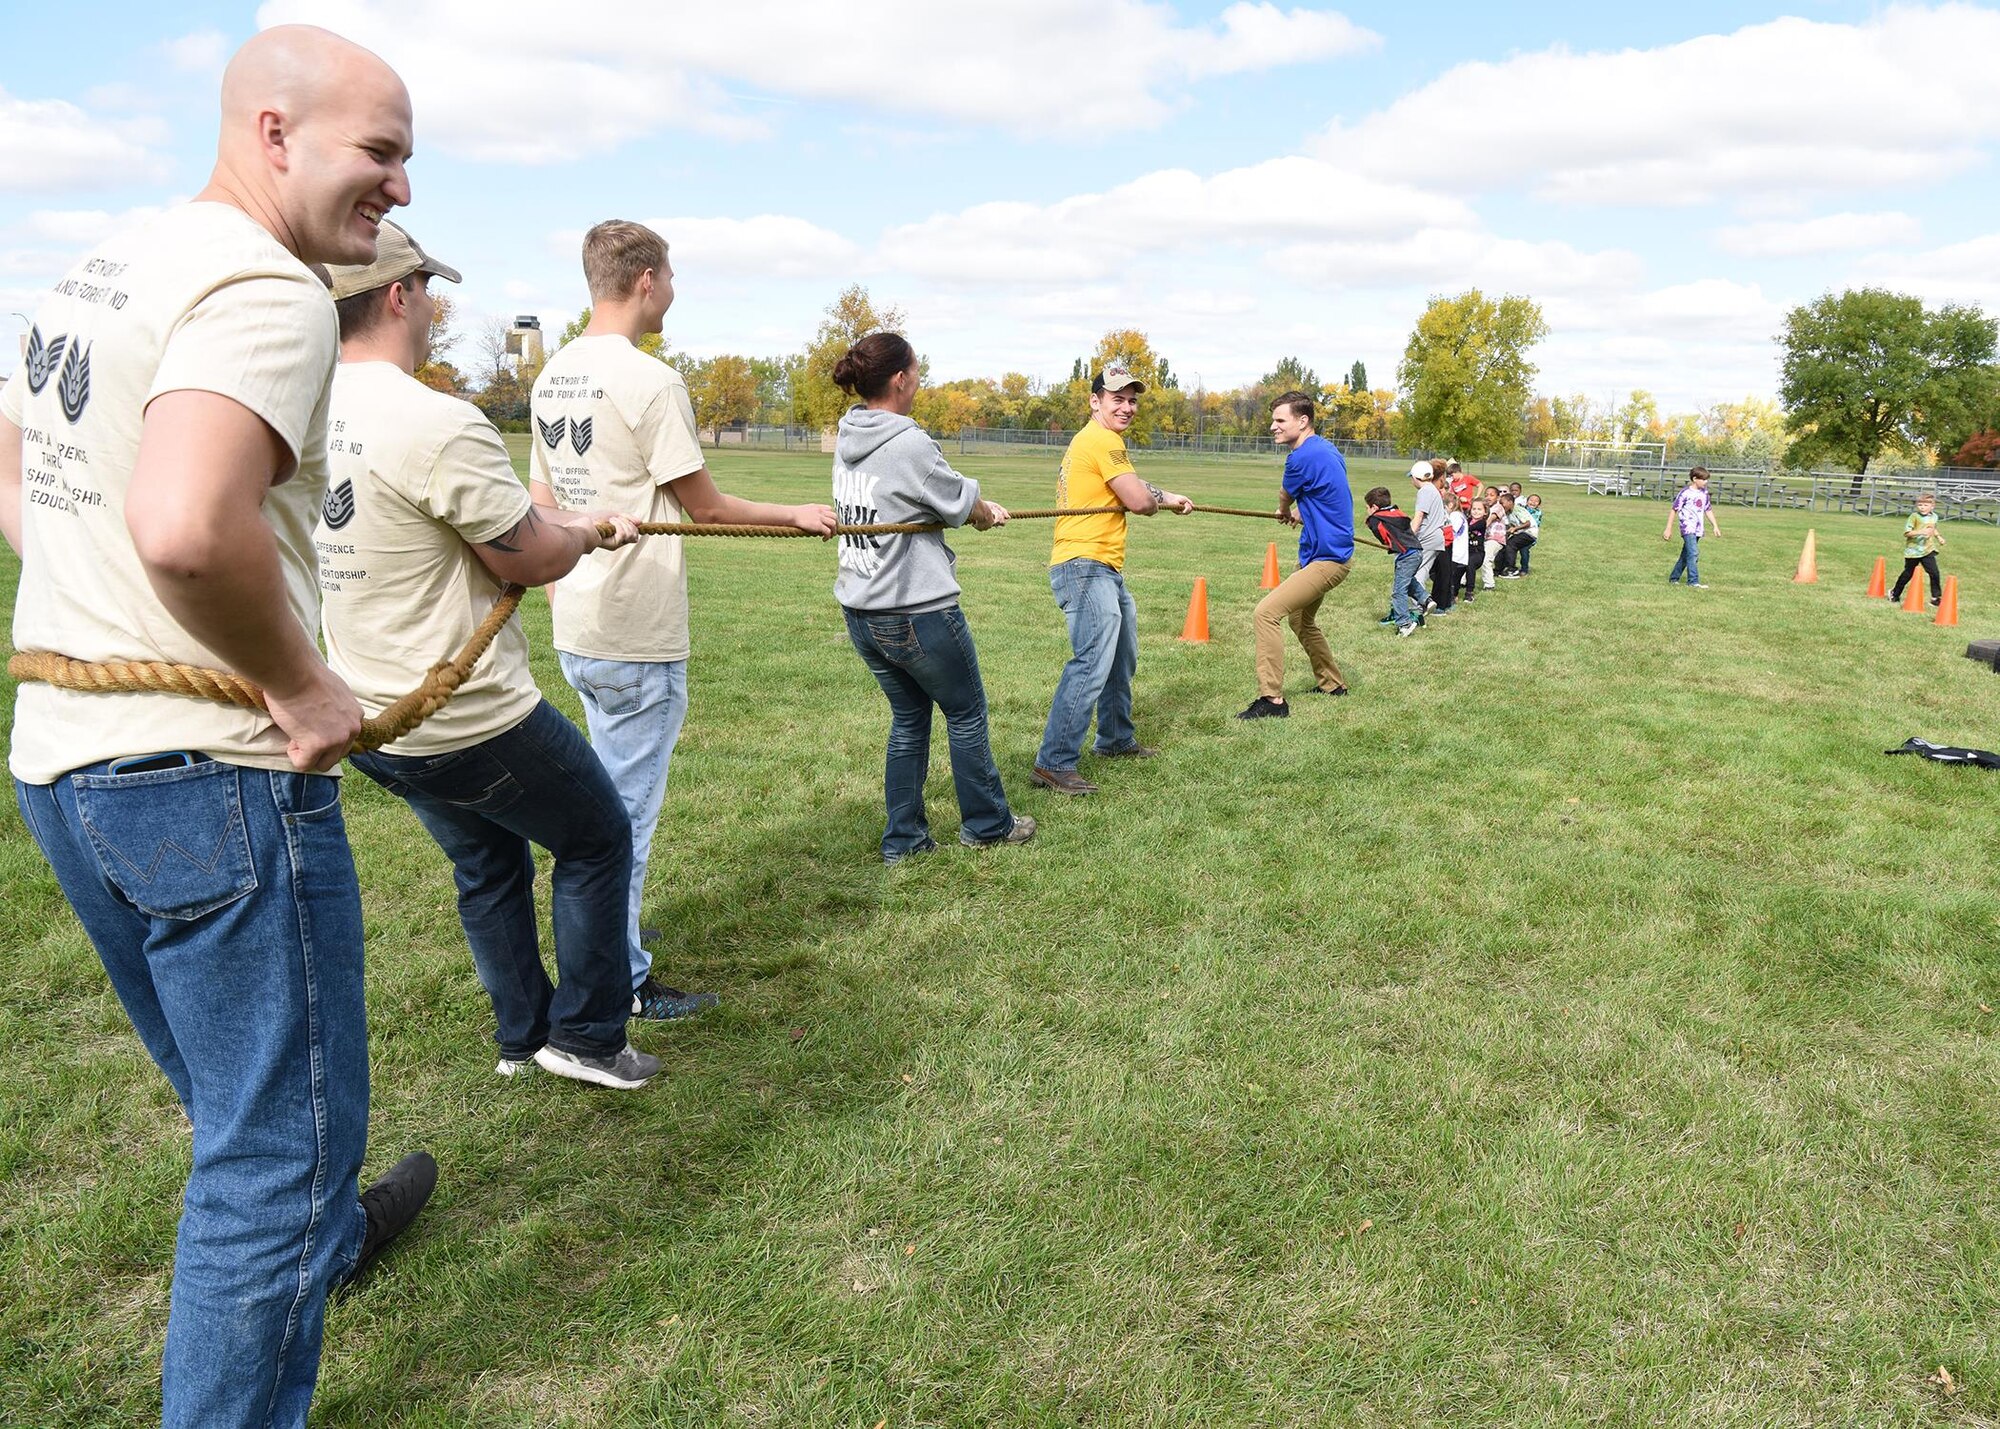 Members of the Network 5/6 play a game of tug-of-war with children during a kid’s deployment day event Sept. 29, 2017, at Grand Forks Air Force Base, North Dakota. The goal of deployment day was to give children a feel of what a deployment is like. (U.S. Air Force photo/Senior Airman Cierra Presentado)